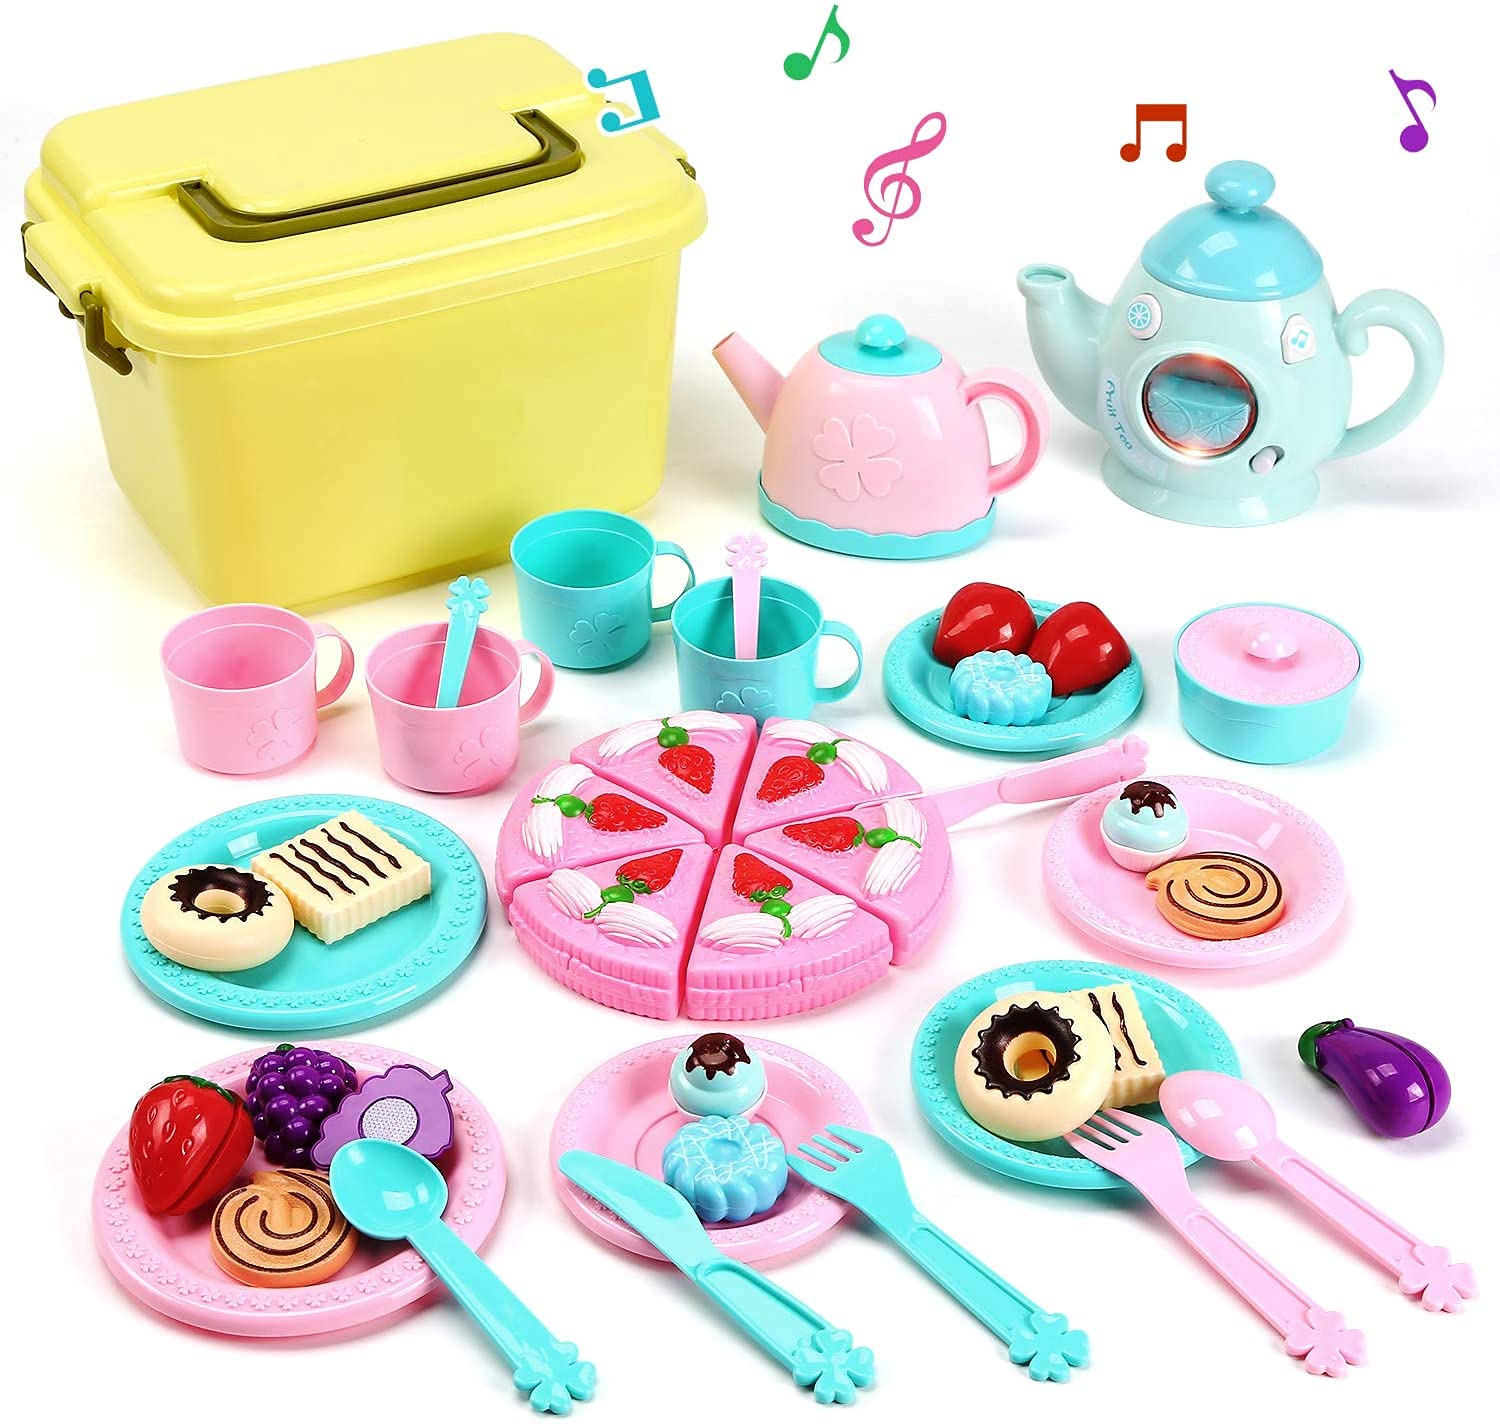 CUTE STONE Kids Toy Tea Party Set Kettle with Light Music, Teapot, Dessert, Cookies, Play Tea Accessories & Carrying Case